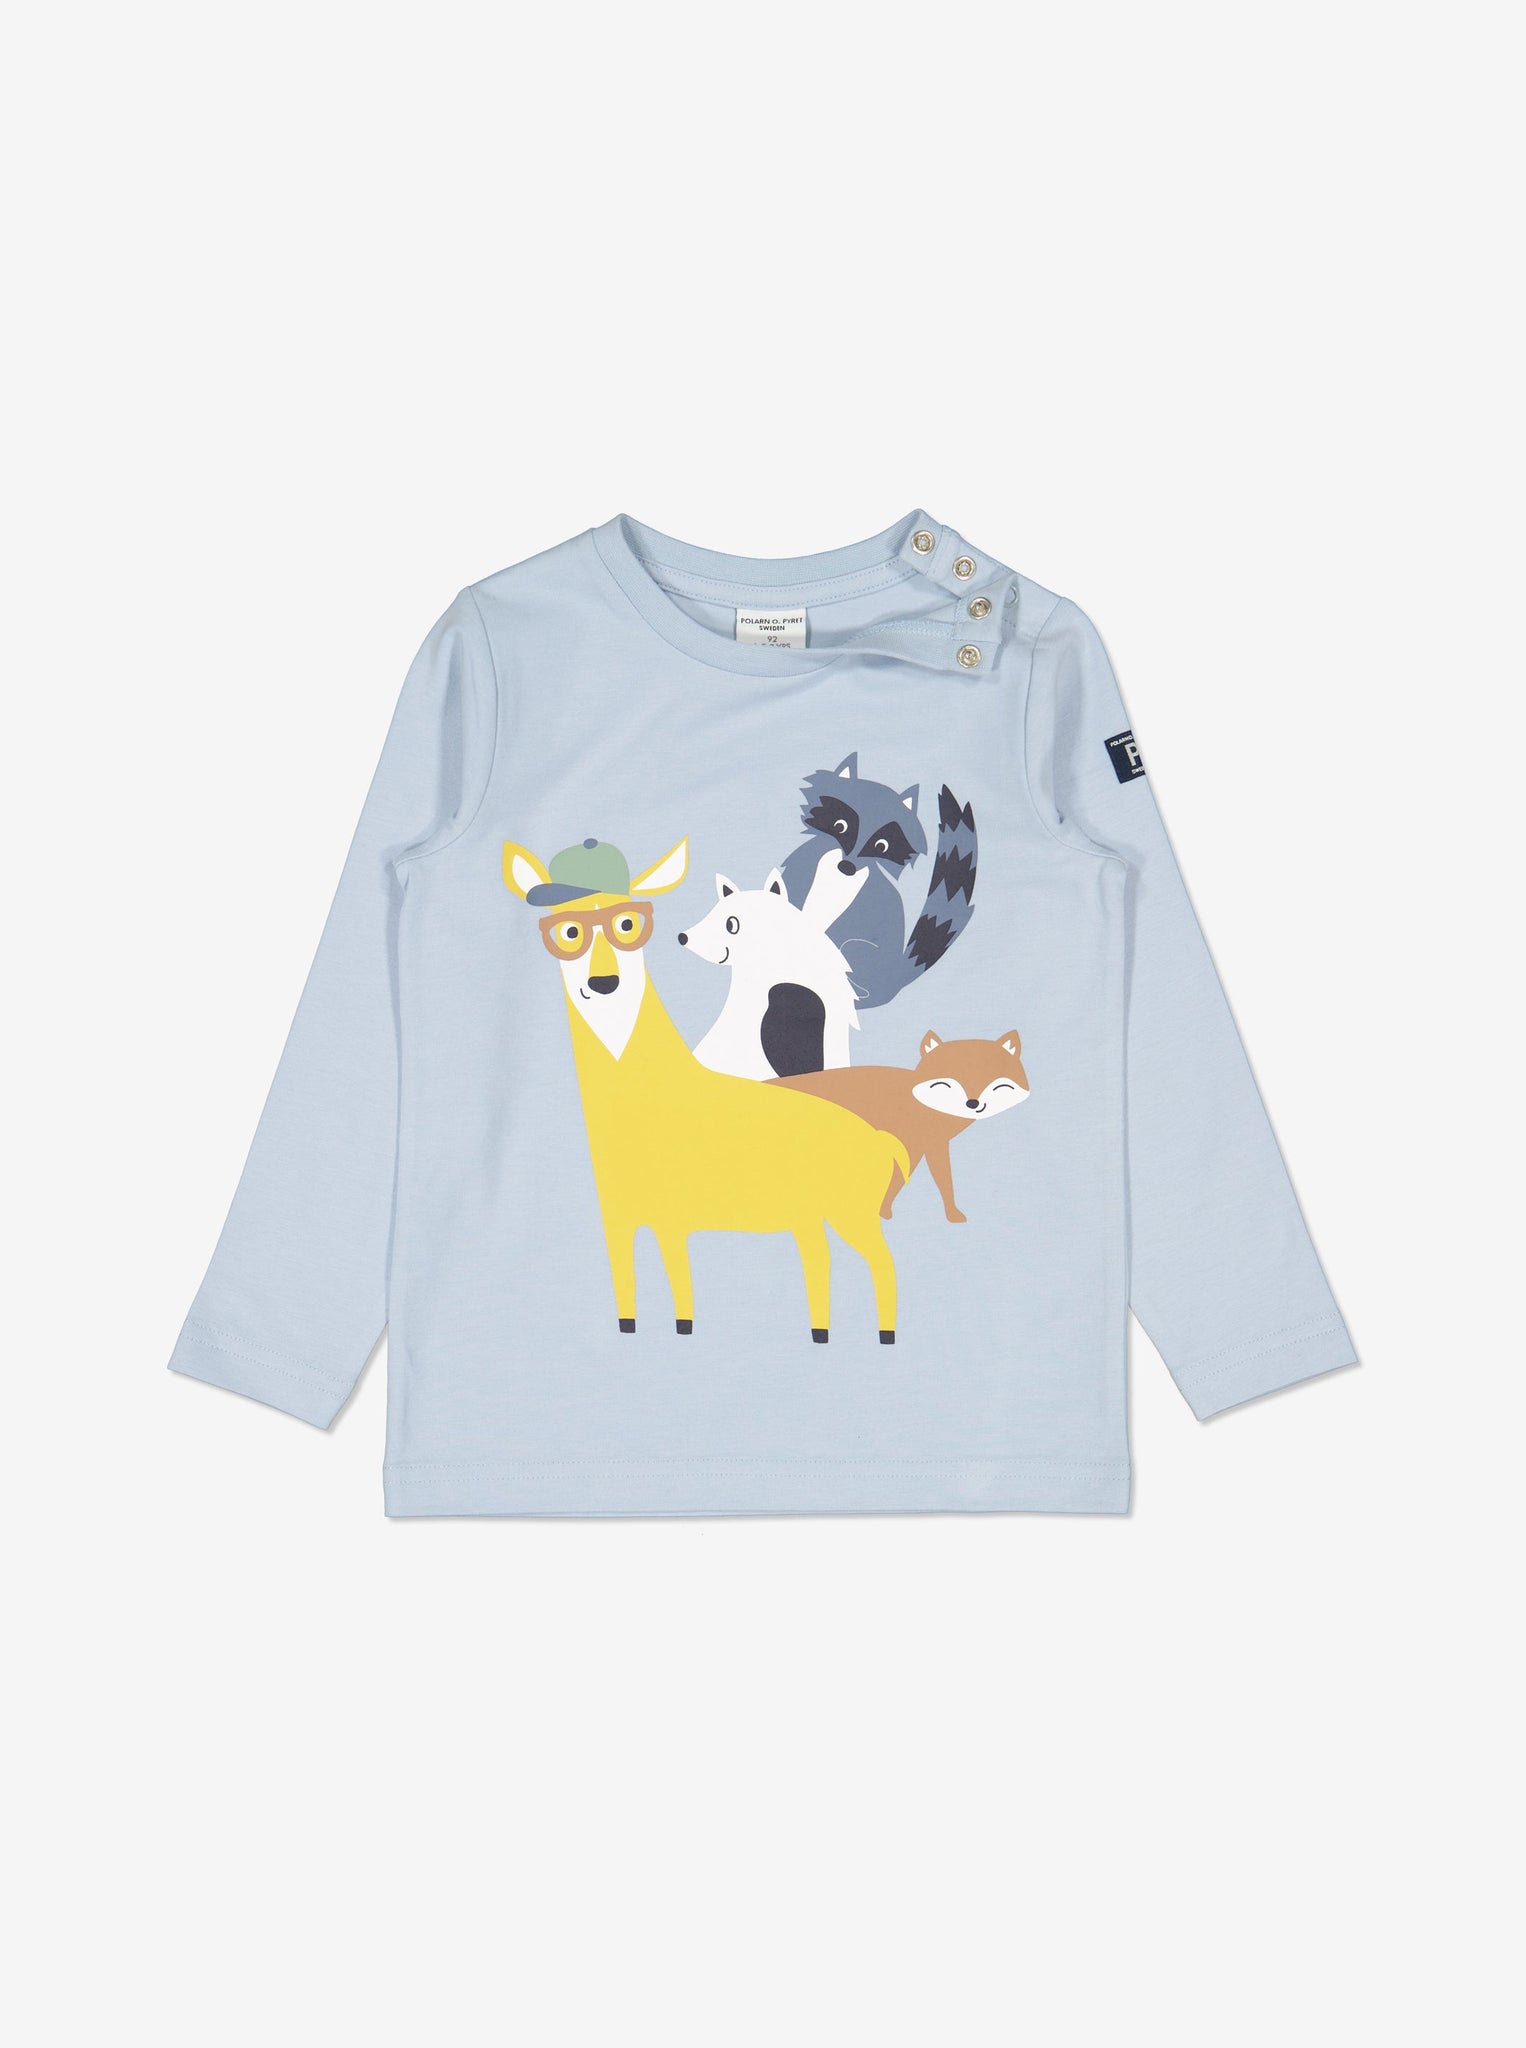  Blue Animal Print Baby Top from Polarn O. Pyret Kidswear. Made using environmentally friendly materials.